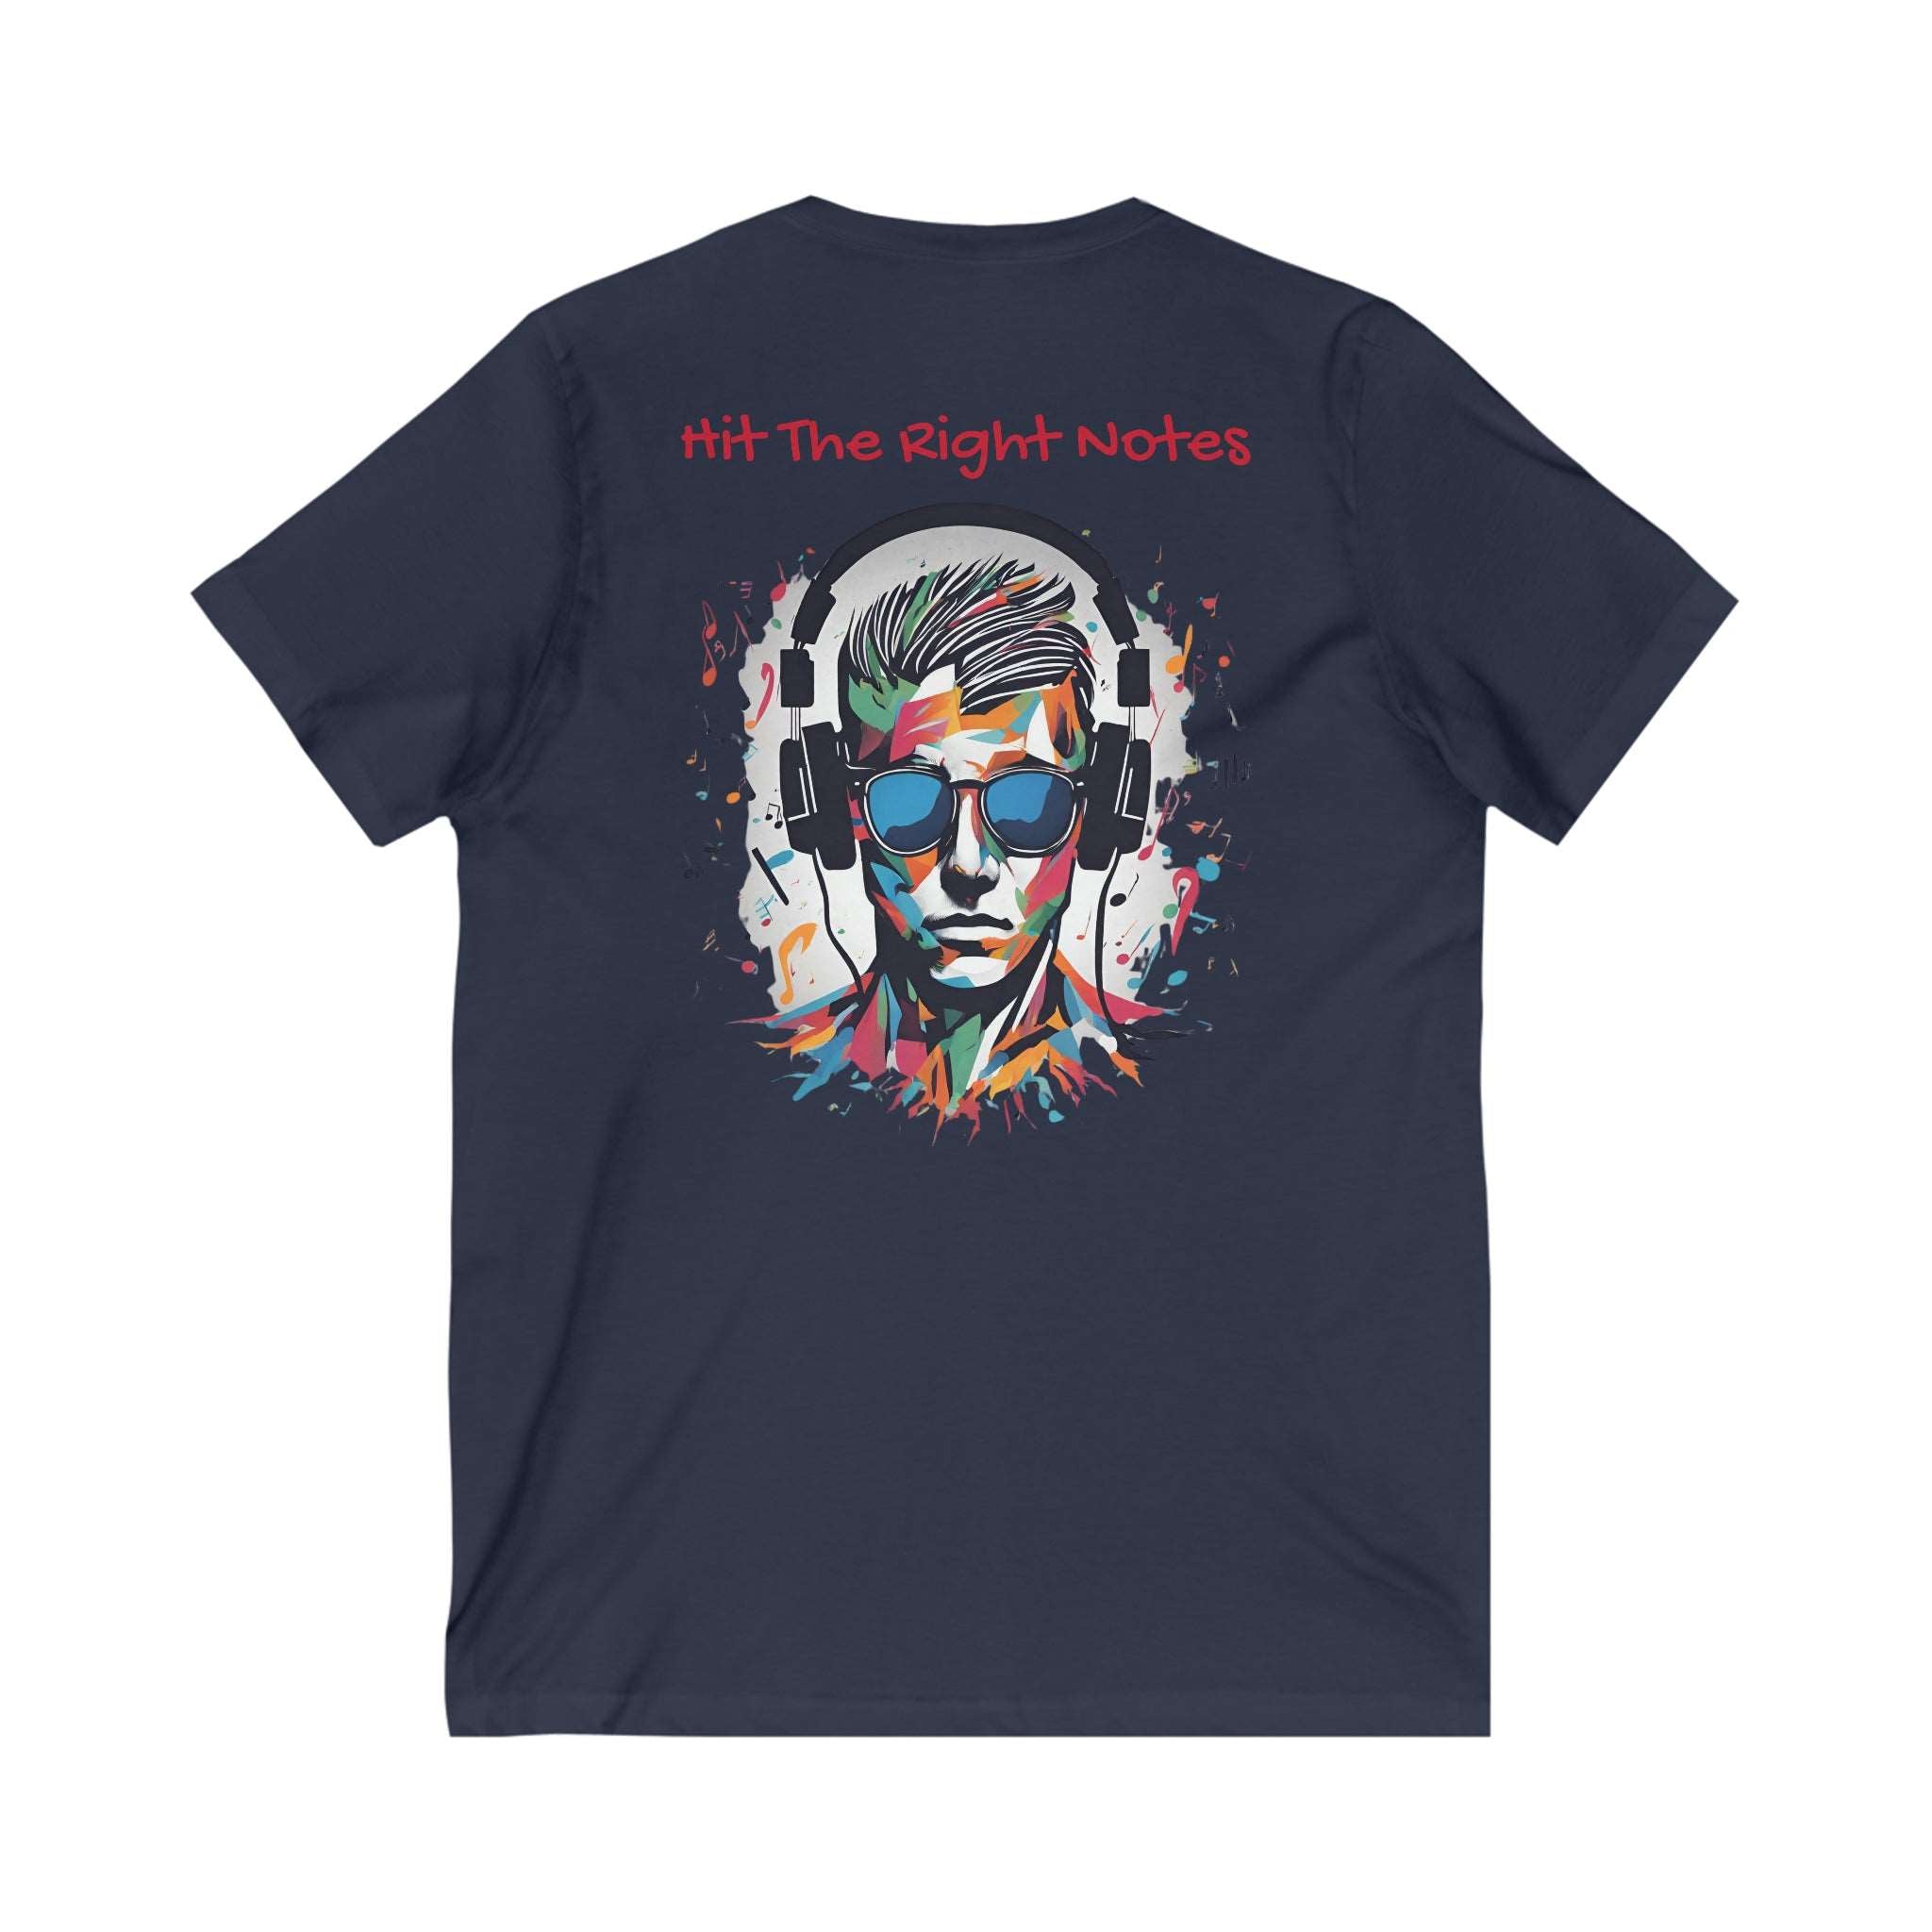 Hit The Right Notes Tee: Start conversations now! Navy Basic T-Shirt Casual Shirt Classic Tee Comfortable Tee Cotton T-Shirt Everyday Wear Graphic Tee Statement Shirt T-shirt Tee Collection Tee for all Tee for Men Tee for Women Unisex Apparel Vintage Tee V-neck 18006761030058562361_2048_3de1cac6-fb0f-4871-90d7-89cb0c5ca17c Printify